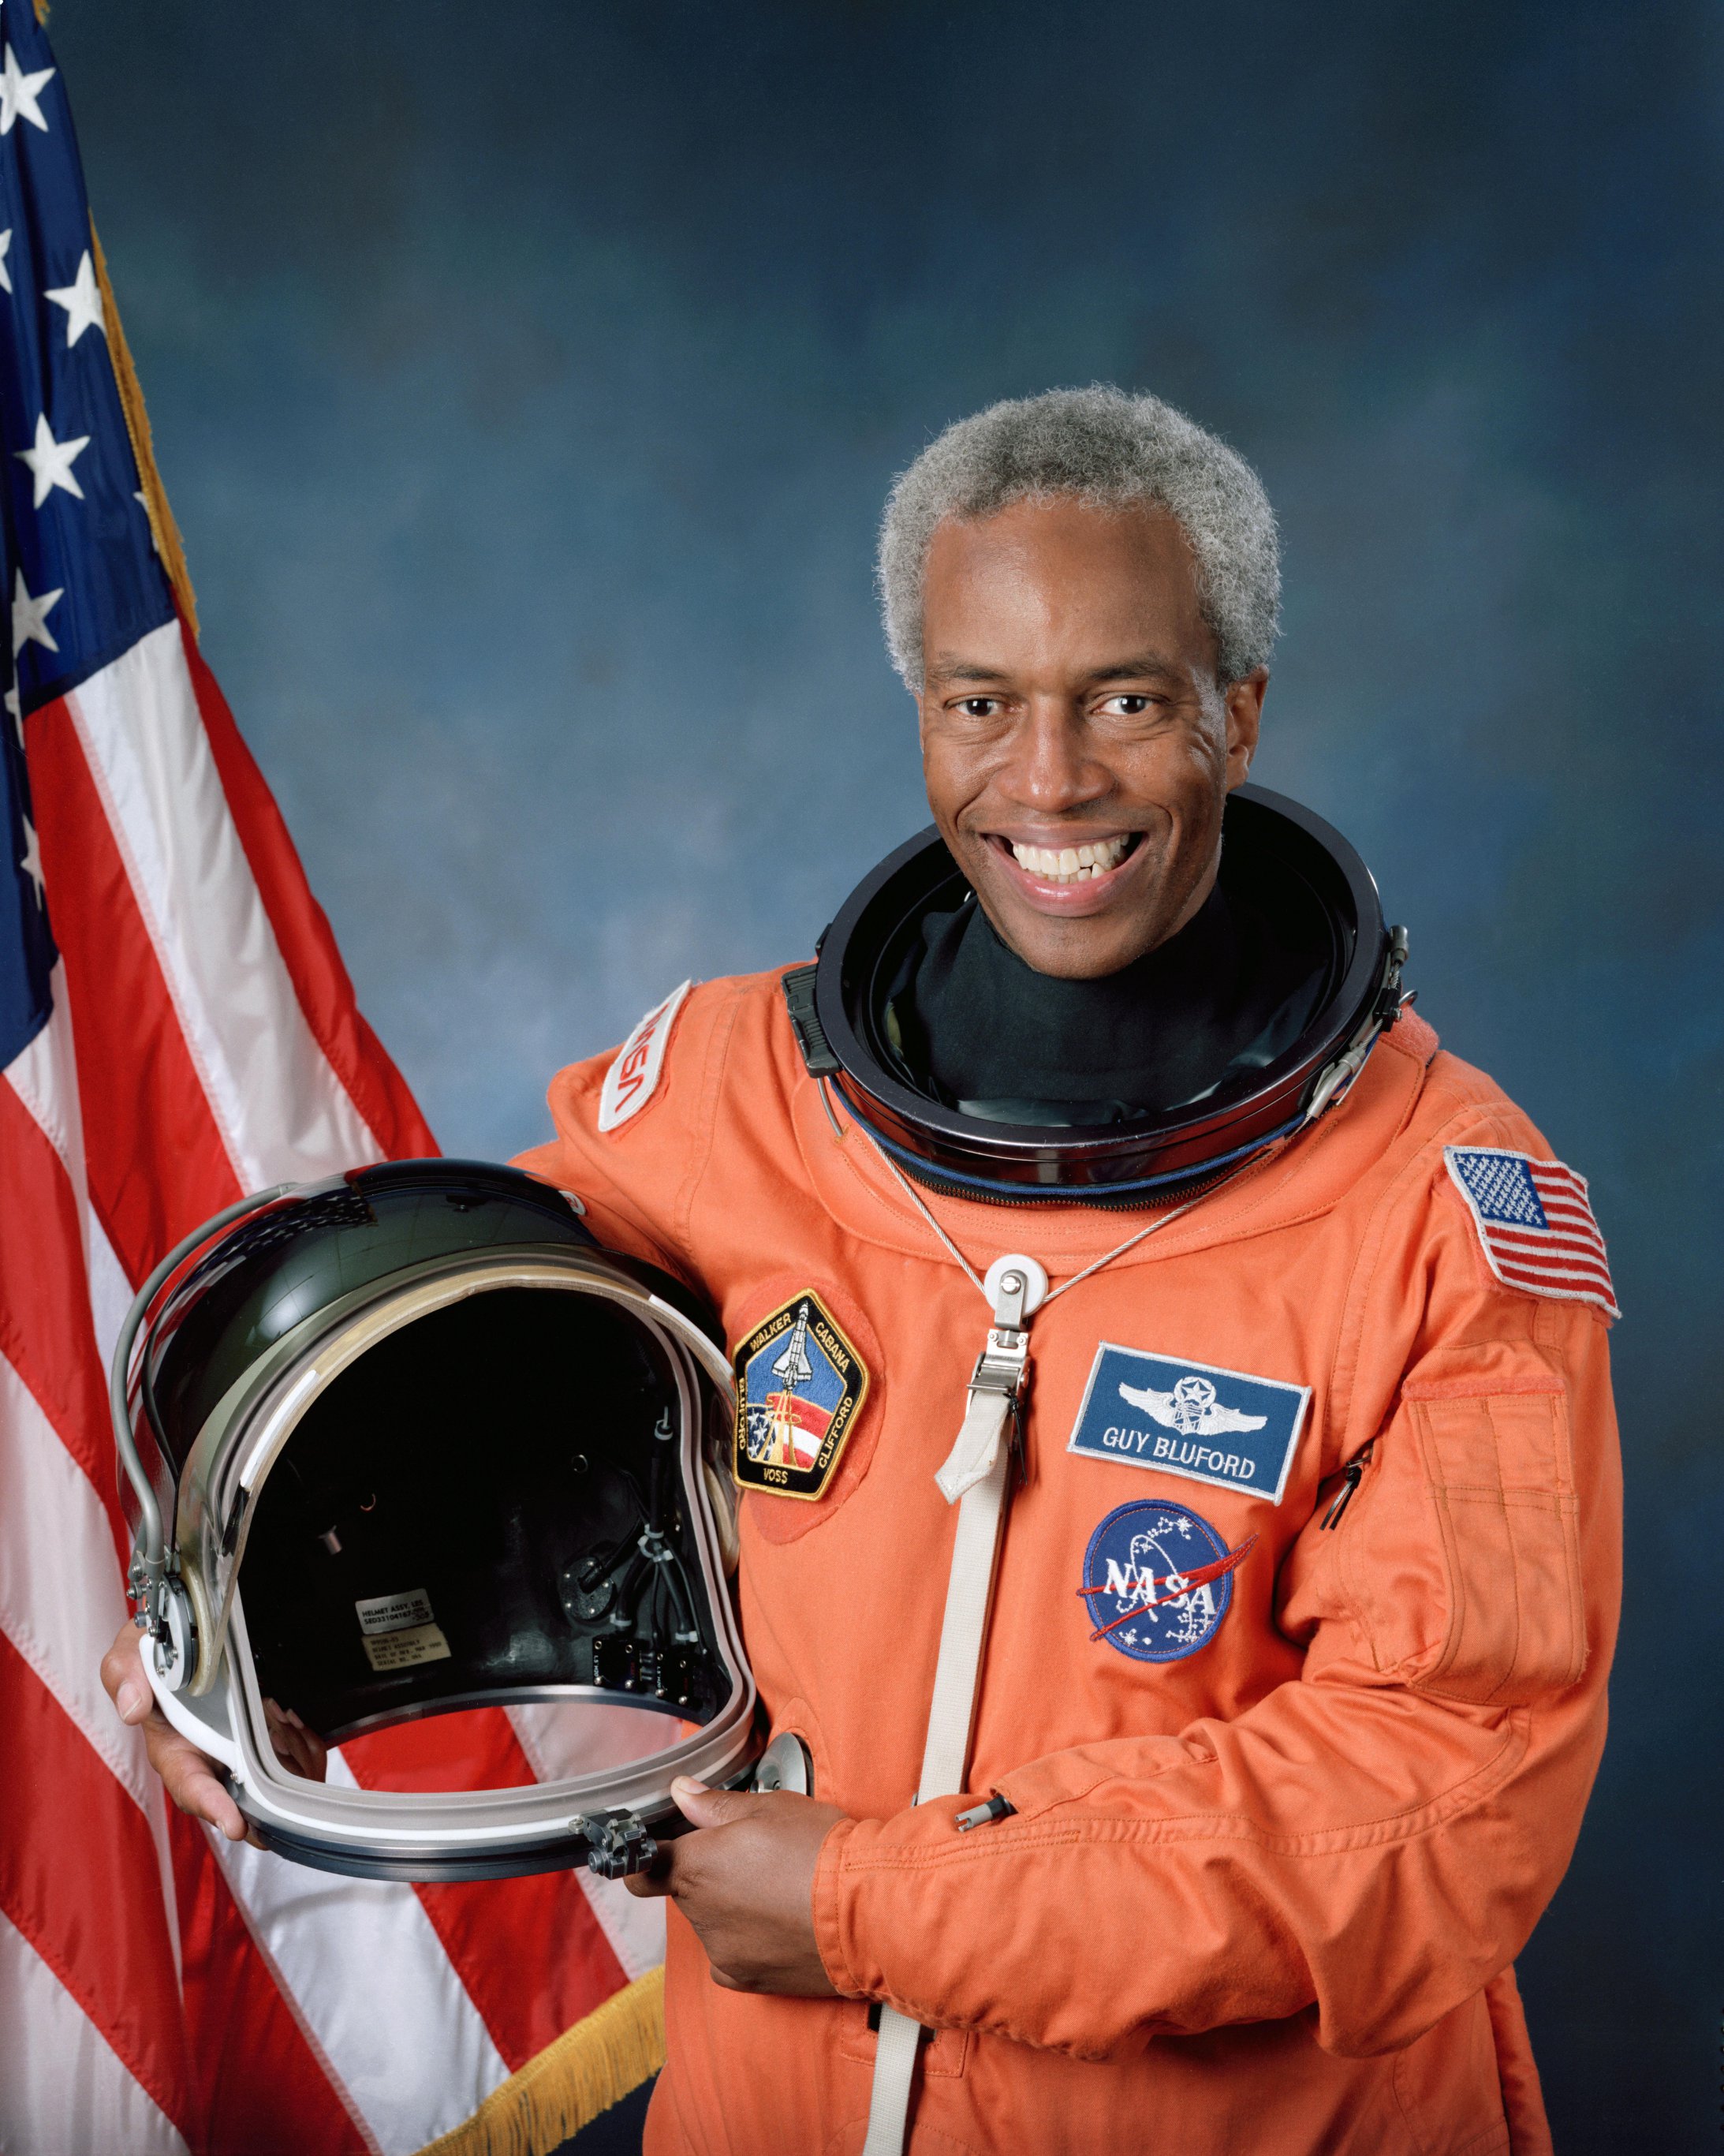 Guion Bluford first african american to travel in space.